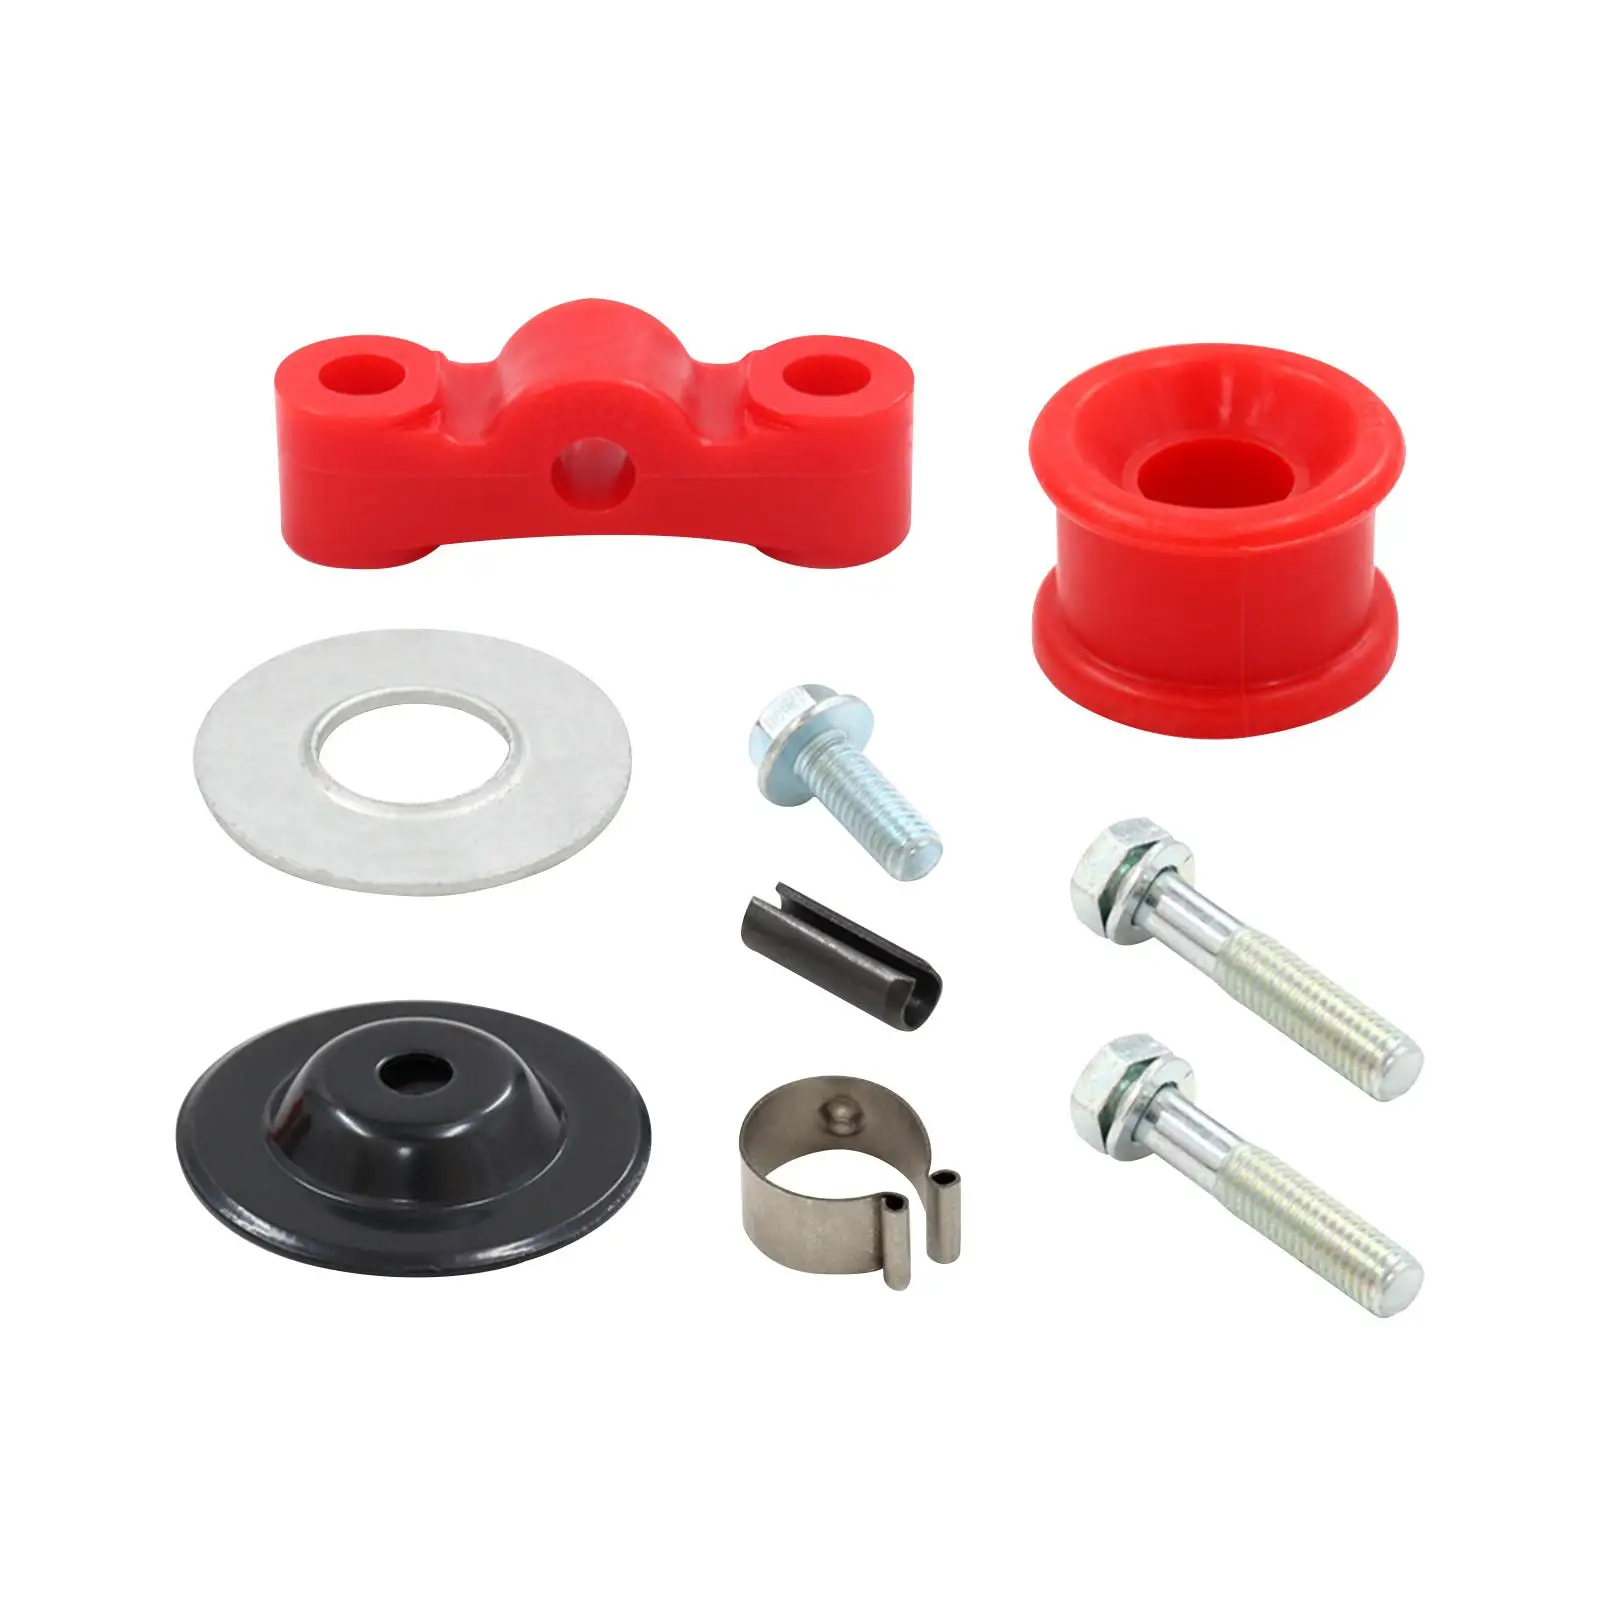 Shifter Stabilizer Bushing Kit for Integra B Series and Energy Bushing Accs Car Shifter Linkage Hardware Pin and Clip